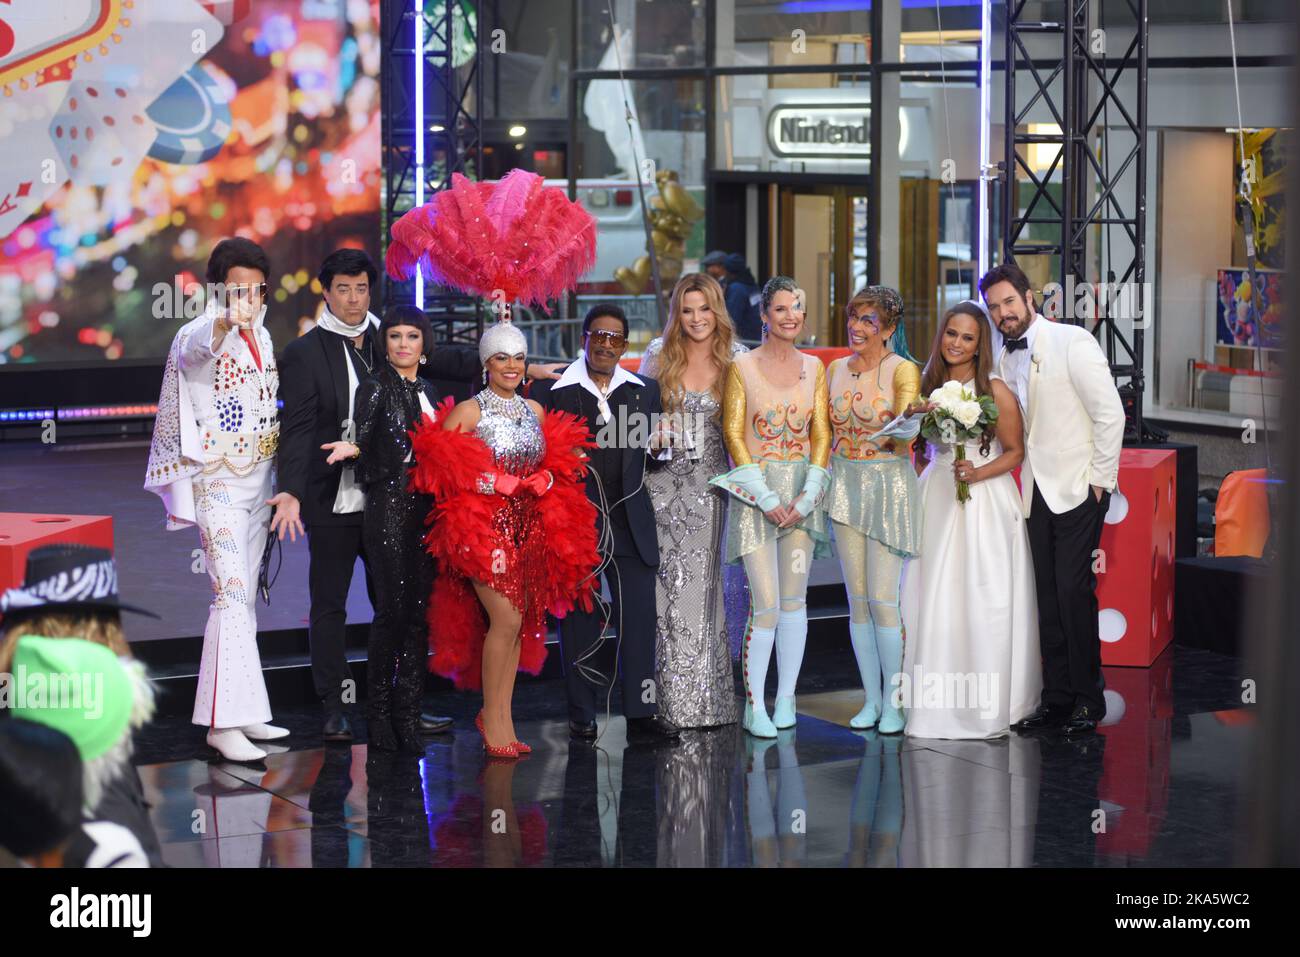 New York, United States. 31st Oct, 2022. (L-R) Willie Geist, Jenna Bush Hager, Carson Daly, Dylan Dreyer, Craig Melvin, Al Roker, Hoda Kotb, Savannah Guthrie, Sheinelle Jones, Kristen Welker and Peter Alexander attend the Today TV Show Halloween Celebration in New York City. (Photo by Efren Landaos/SOPA Images/Sipa USA) Credit: Sipa USA/Alamy Live News Stock Photo